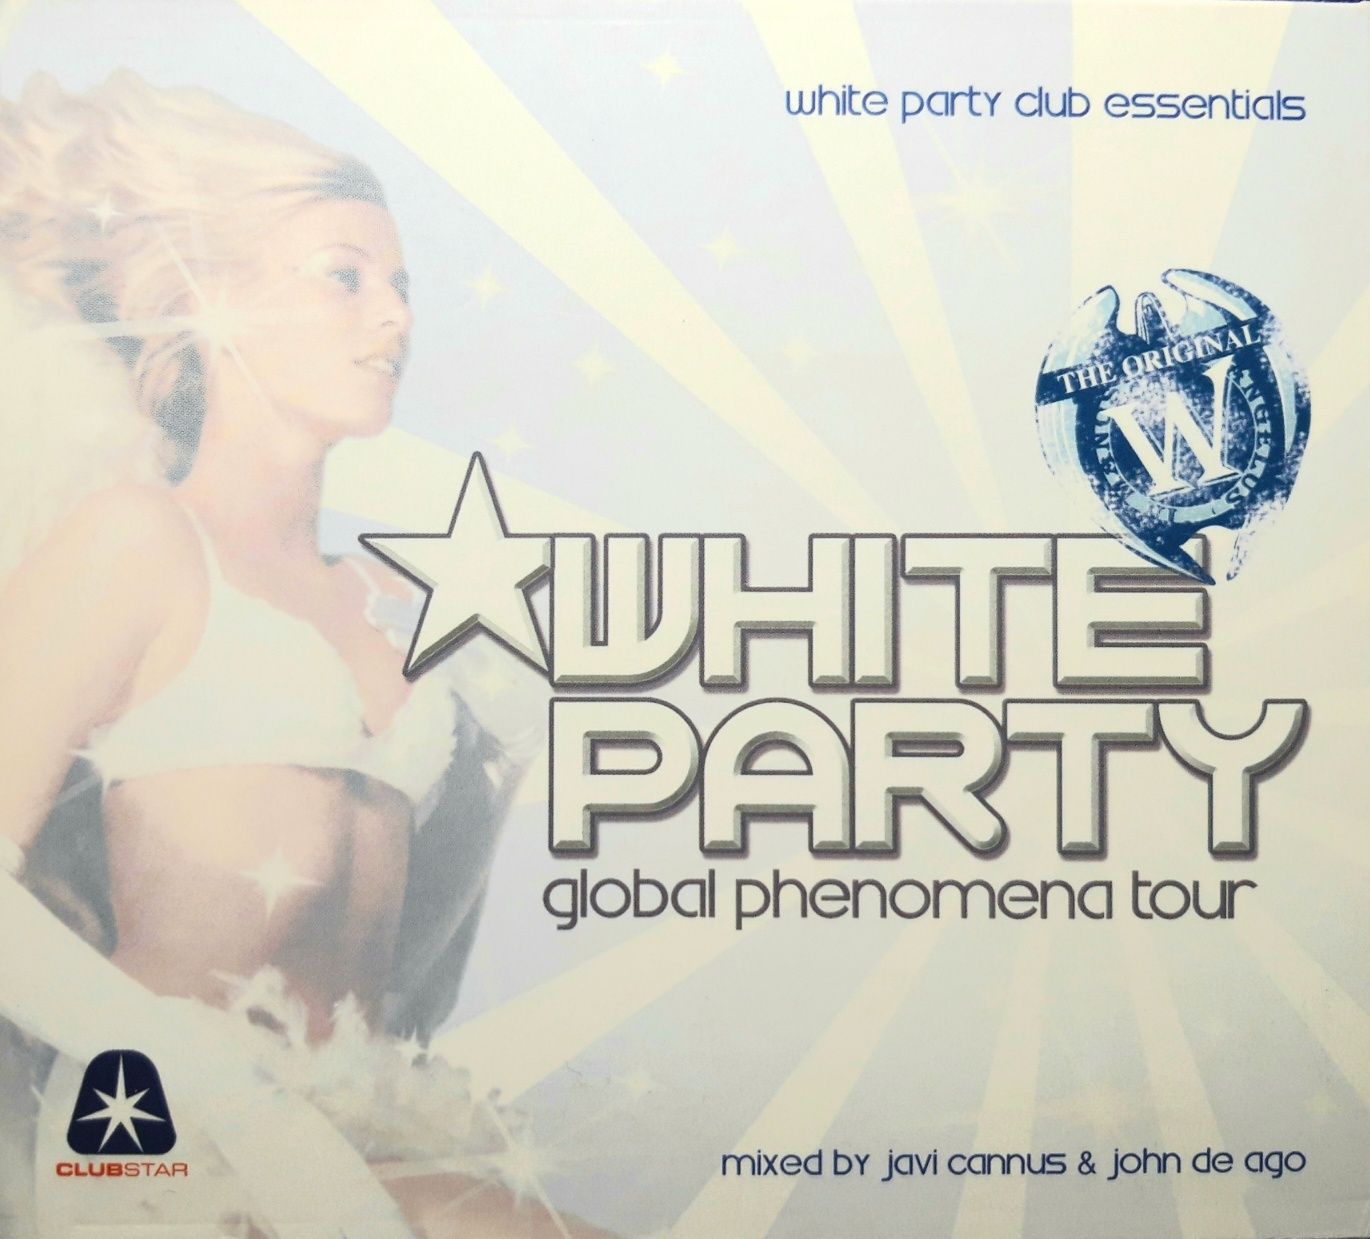 White Party Club Essentials (2xCD, 2005)